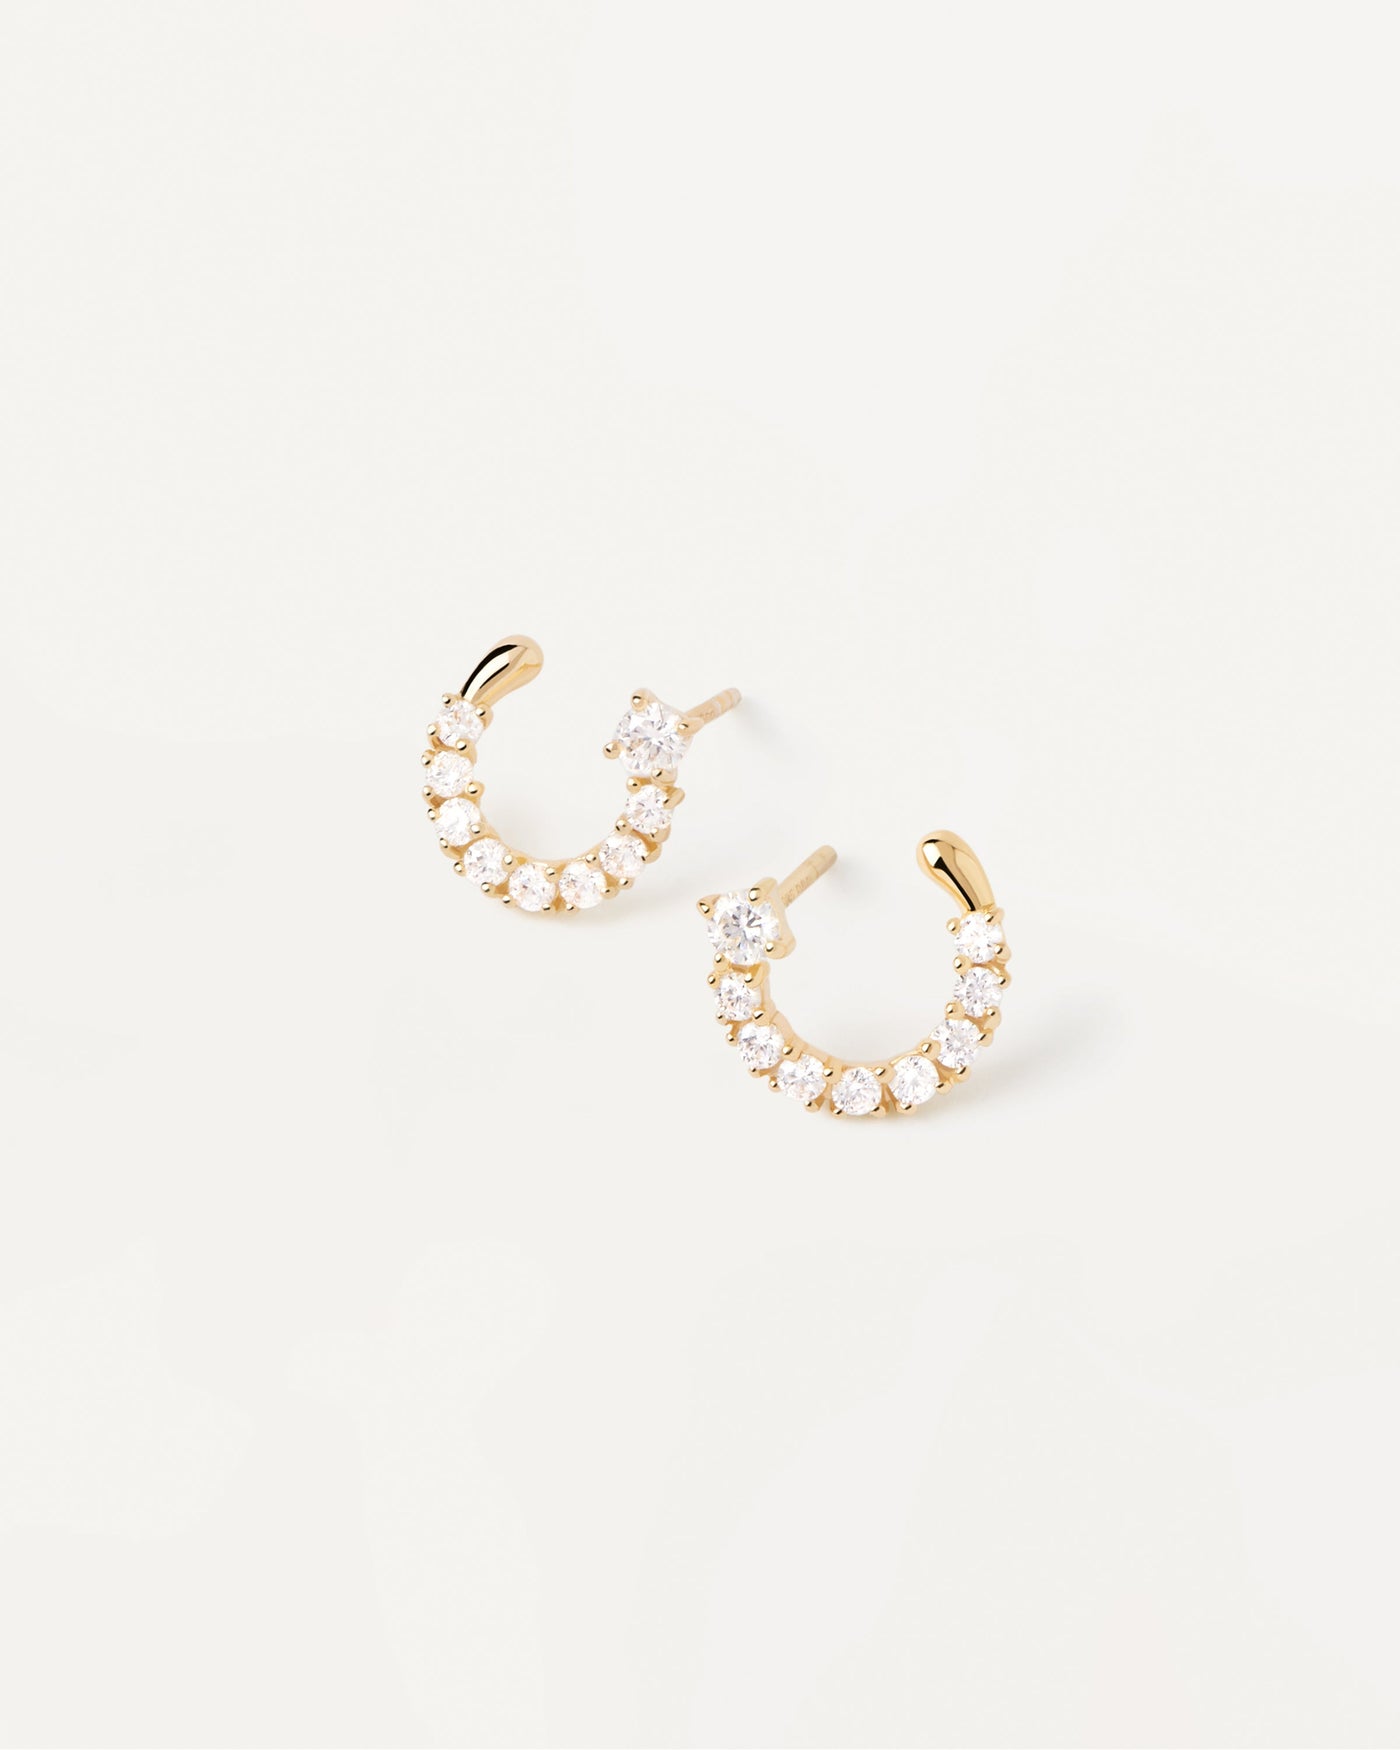 2023 Selection | Leona Earrings. Semi-circle small earrings in gold-plated silver with white crystals. Get the latest arrival from PDPAOLA. Place your order safely and get this Best Seller. Free Shipping.